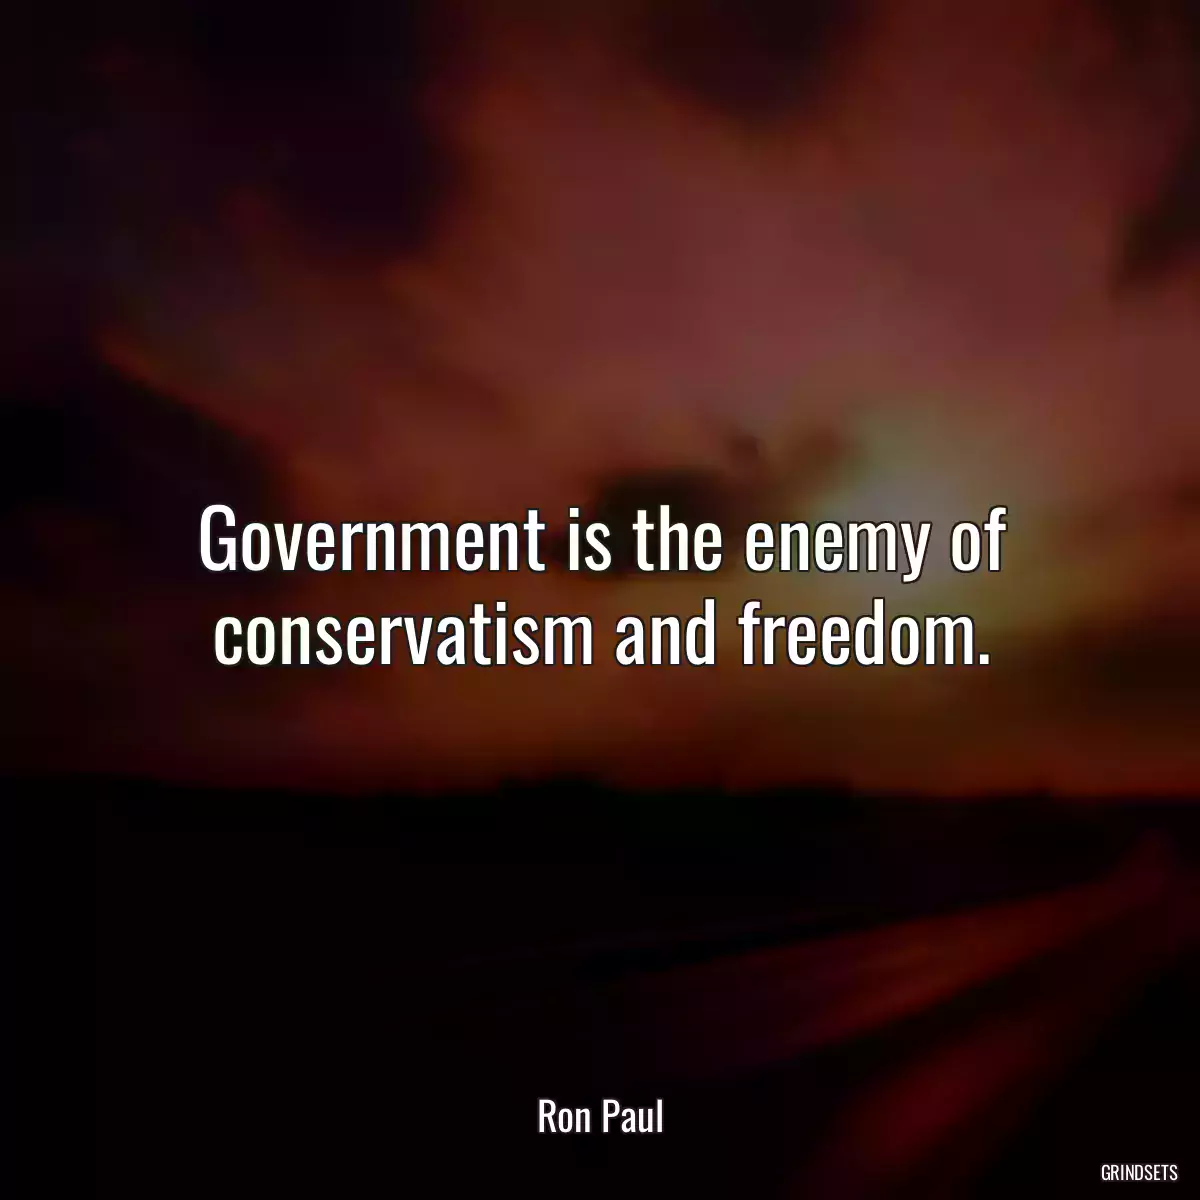 Government is the enemy of conservatism and freedom.